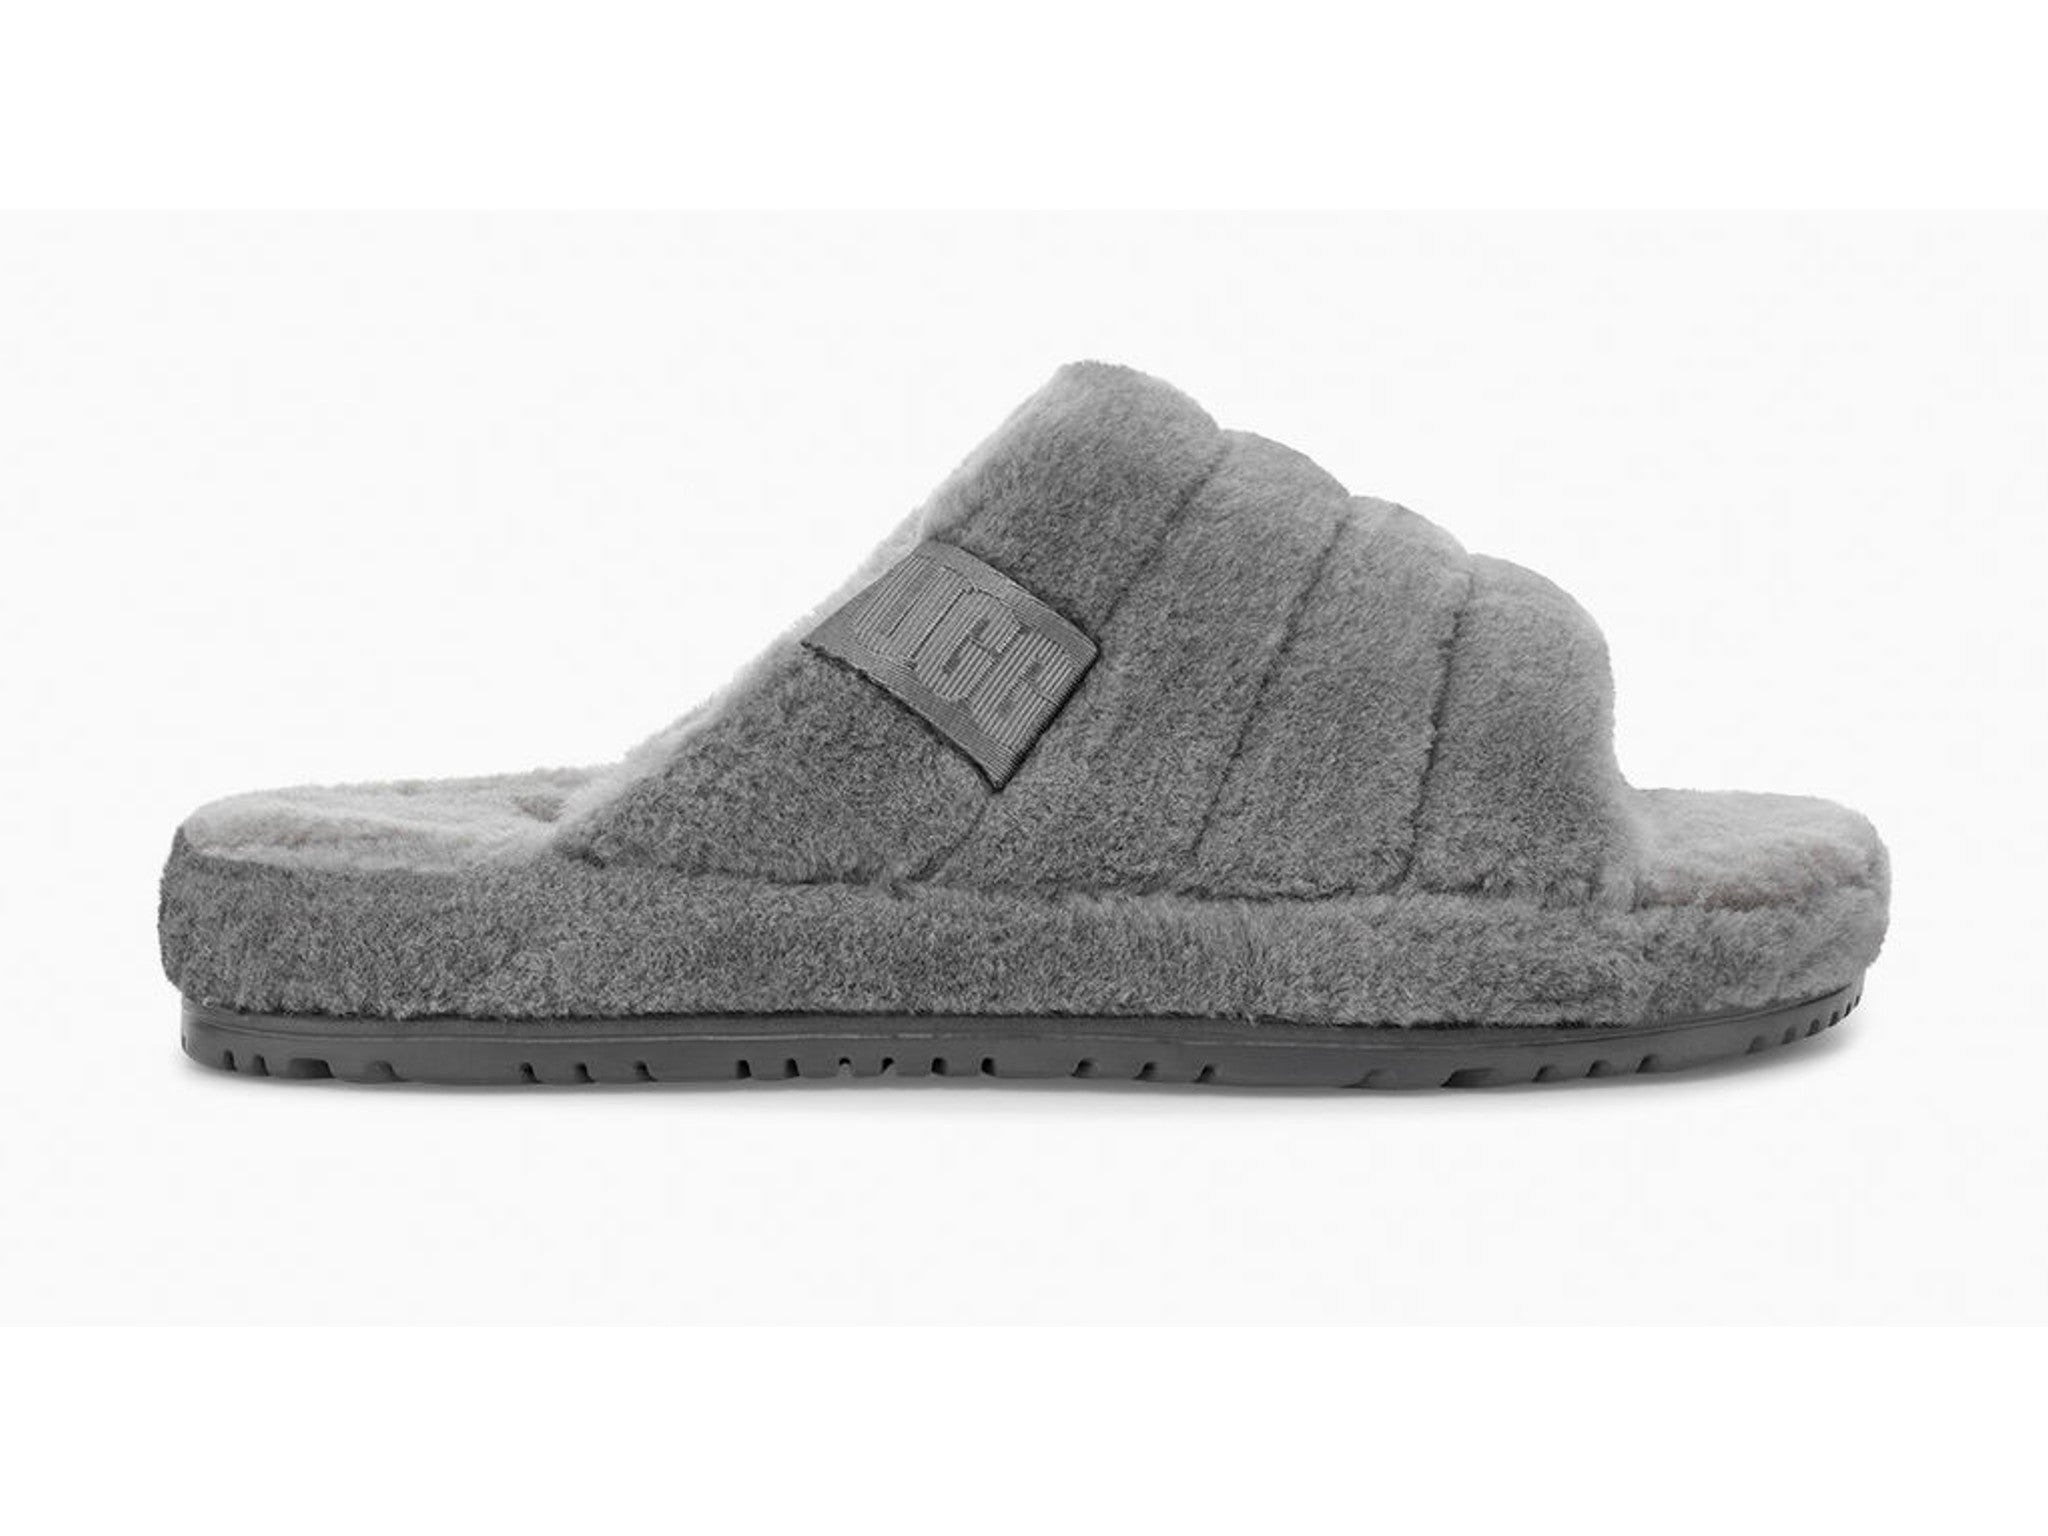 10 Best Slippers for Men 2023 - Warm and Comfortable House Shoes